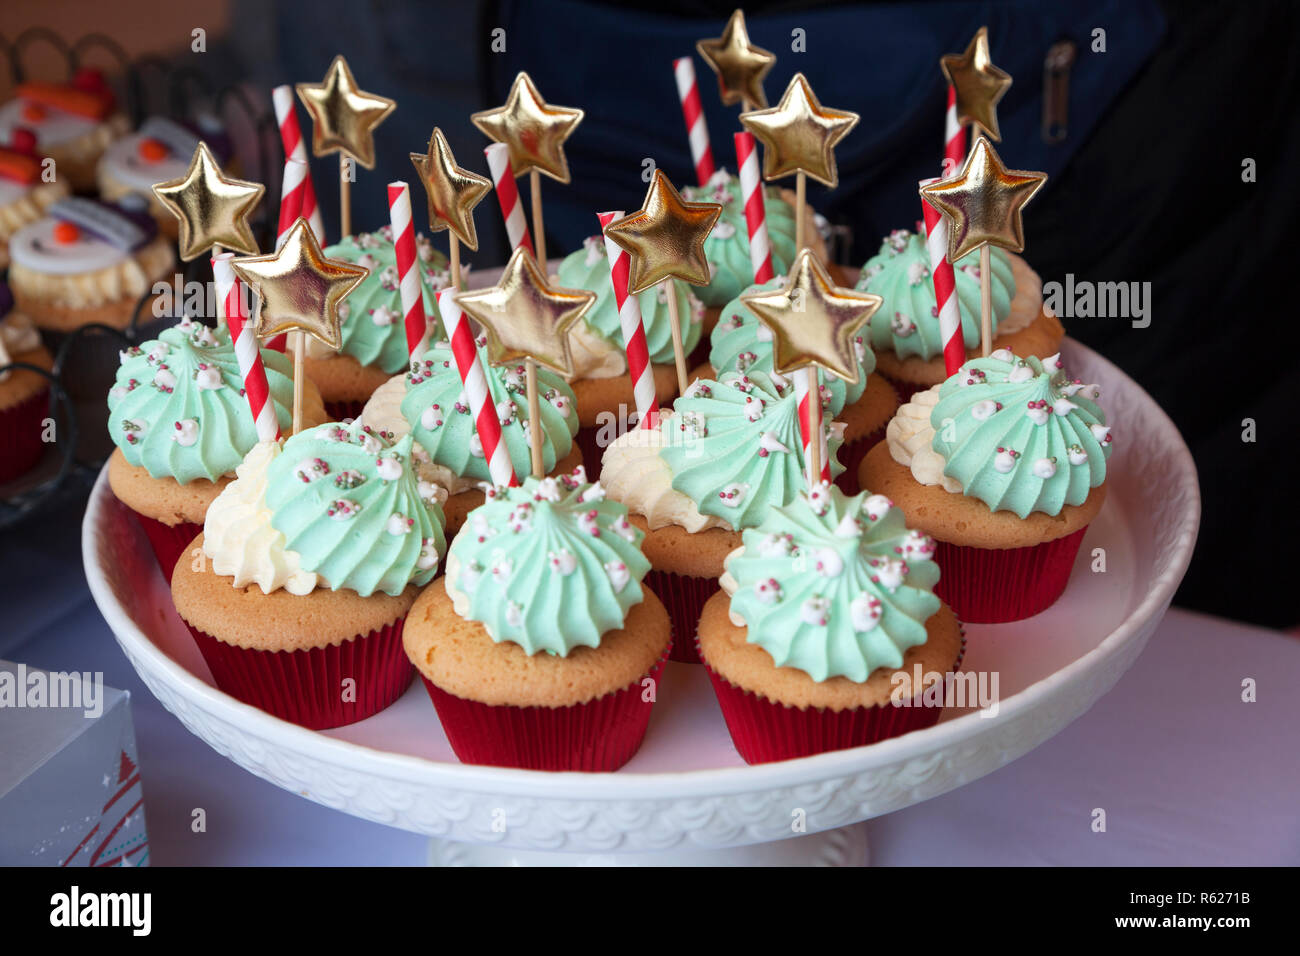 Cup cakes decorated with cream, candy canes and golden stars Stock Photo